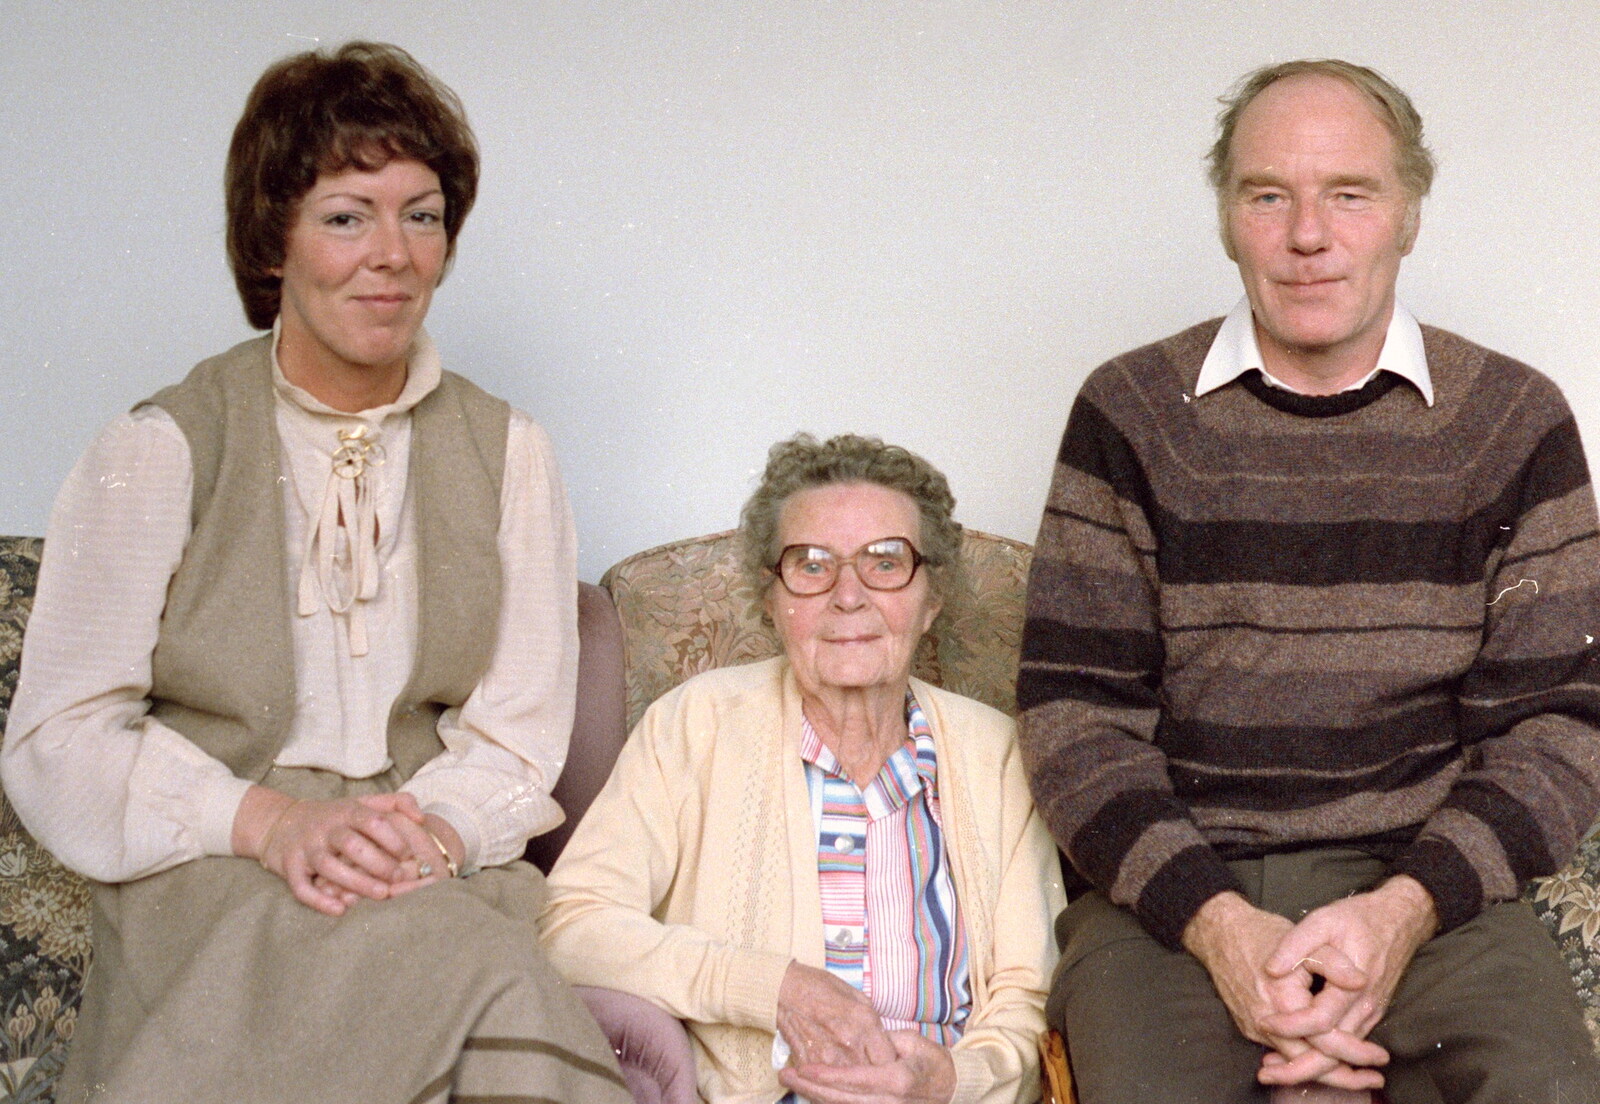 Maureen, with the Old Chap and his mother from Christmas in Macclesfield and Wetherby, Cheshire  and Yorkshire - 25th December 1985